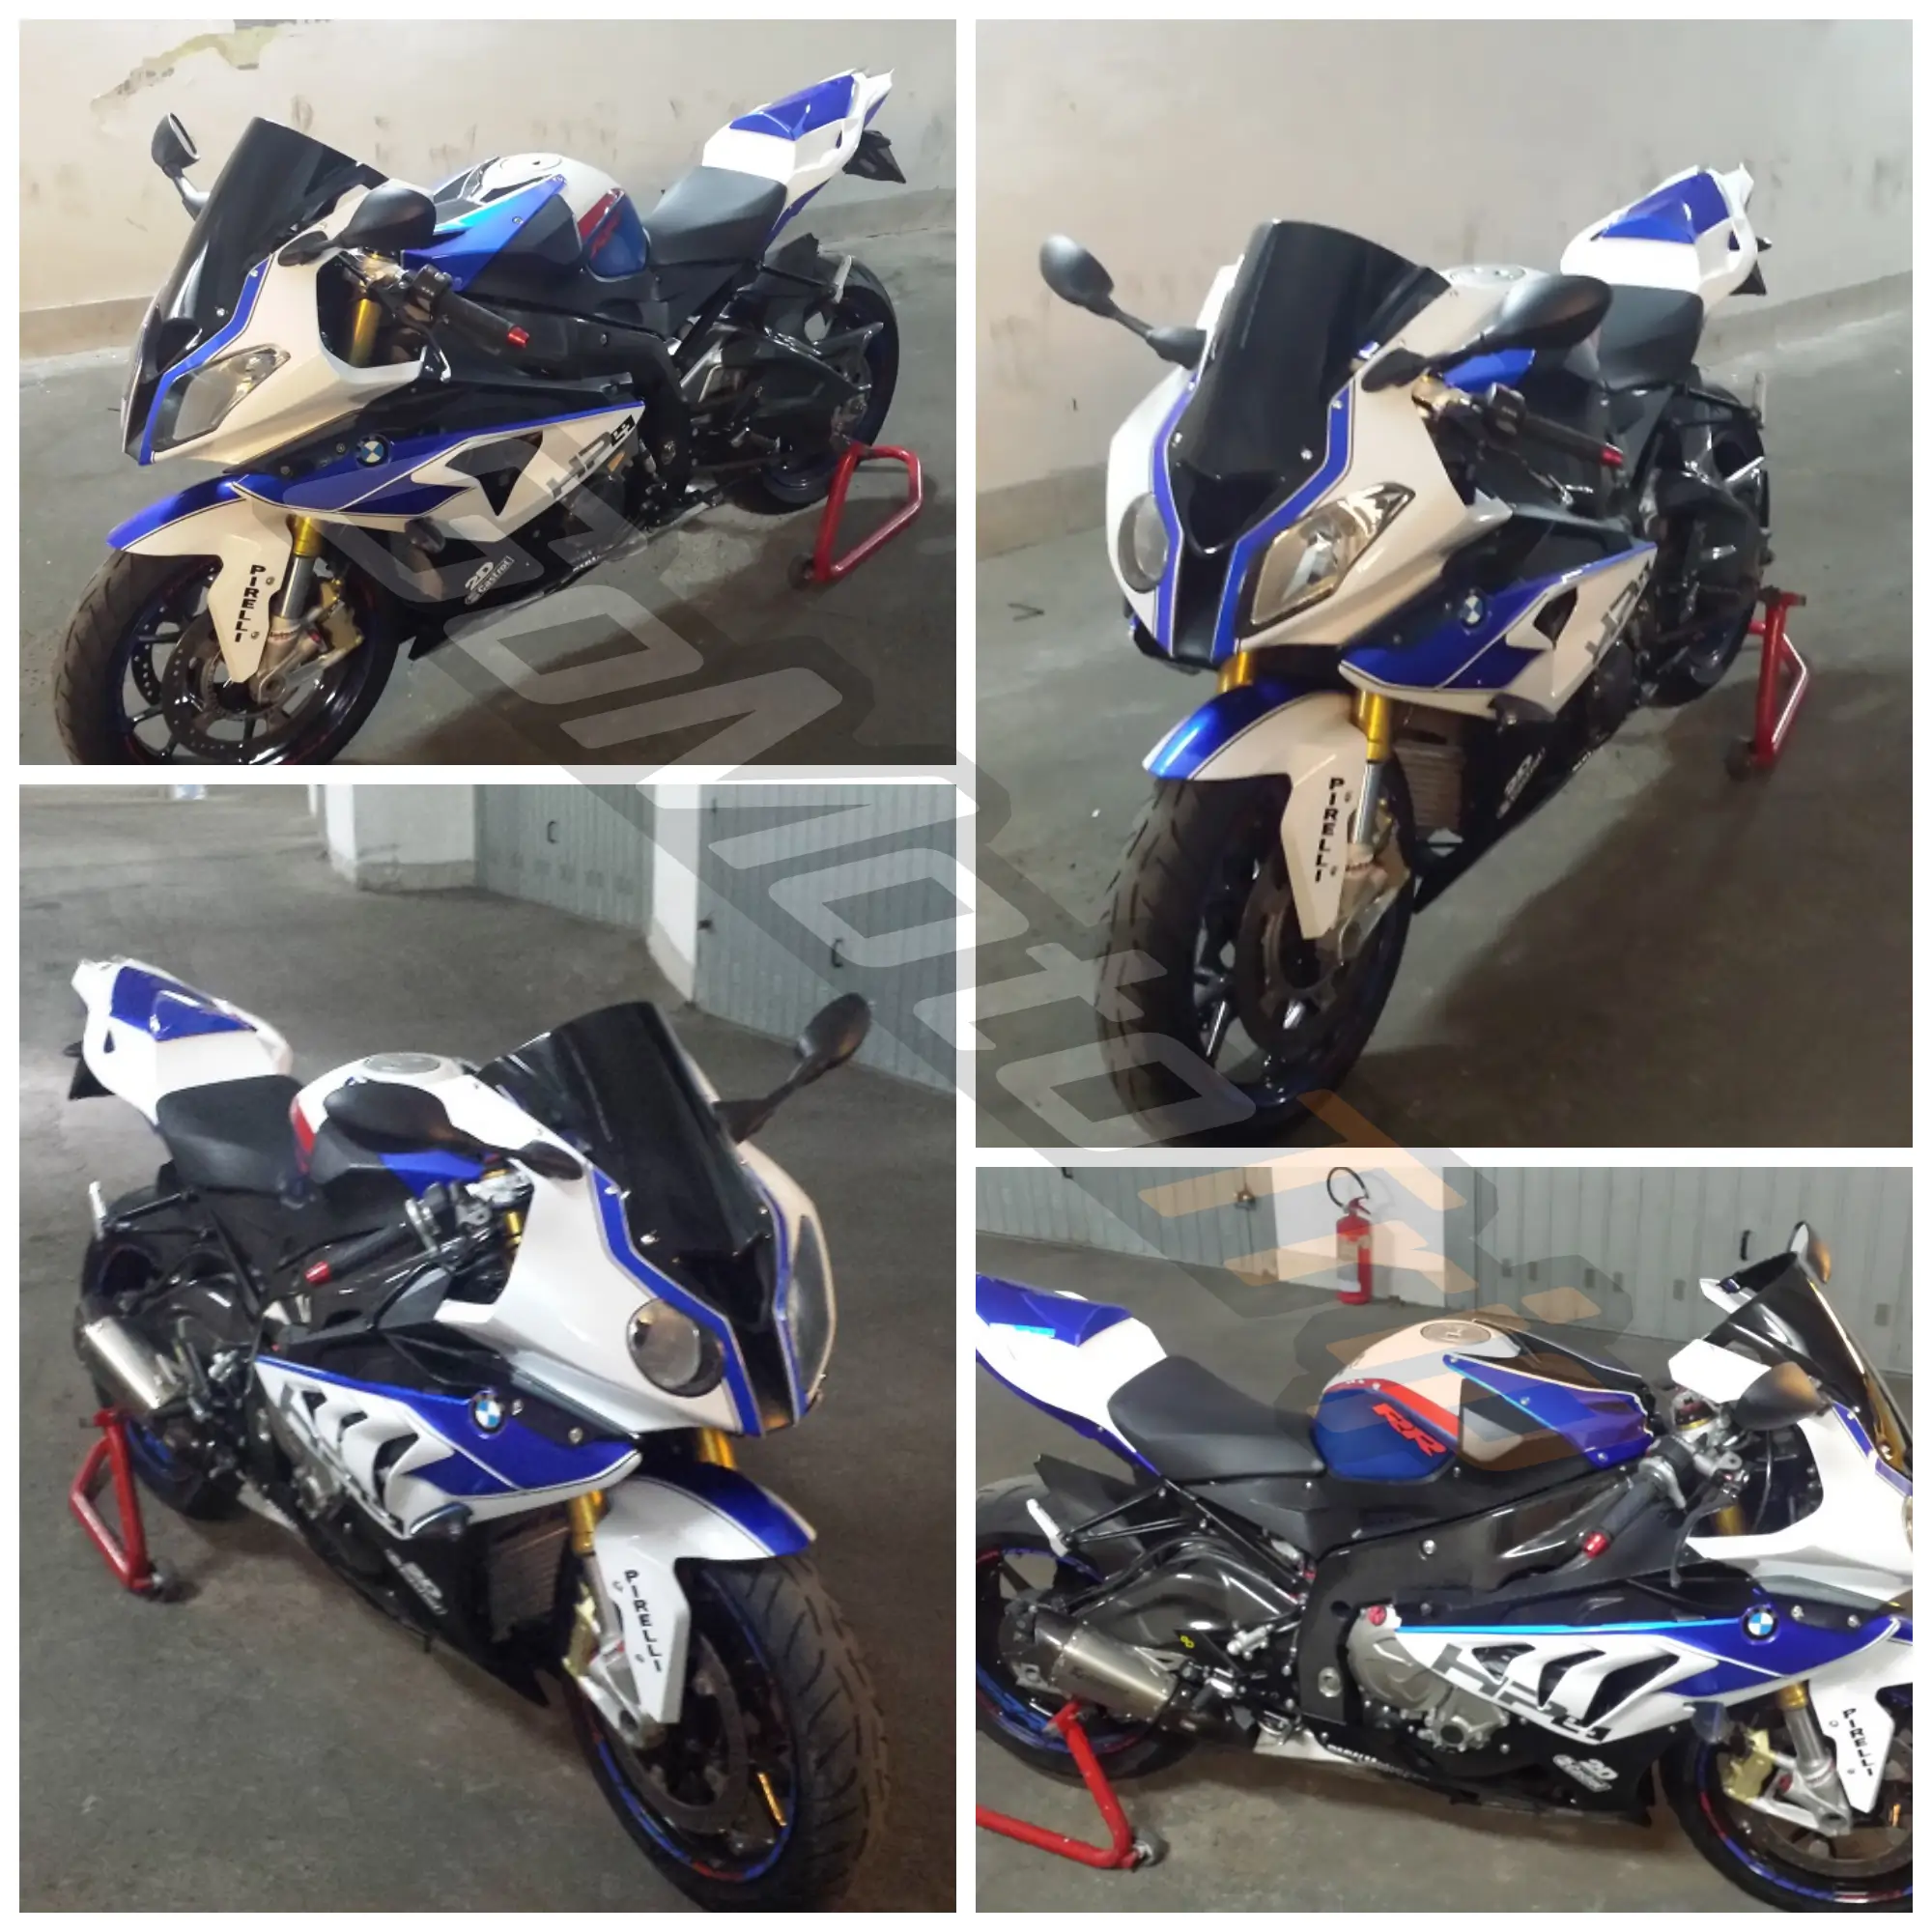 Rider-Review-Luciano-BMW-S1000RR-HP4-Fairing